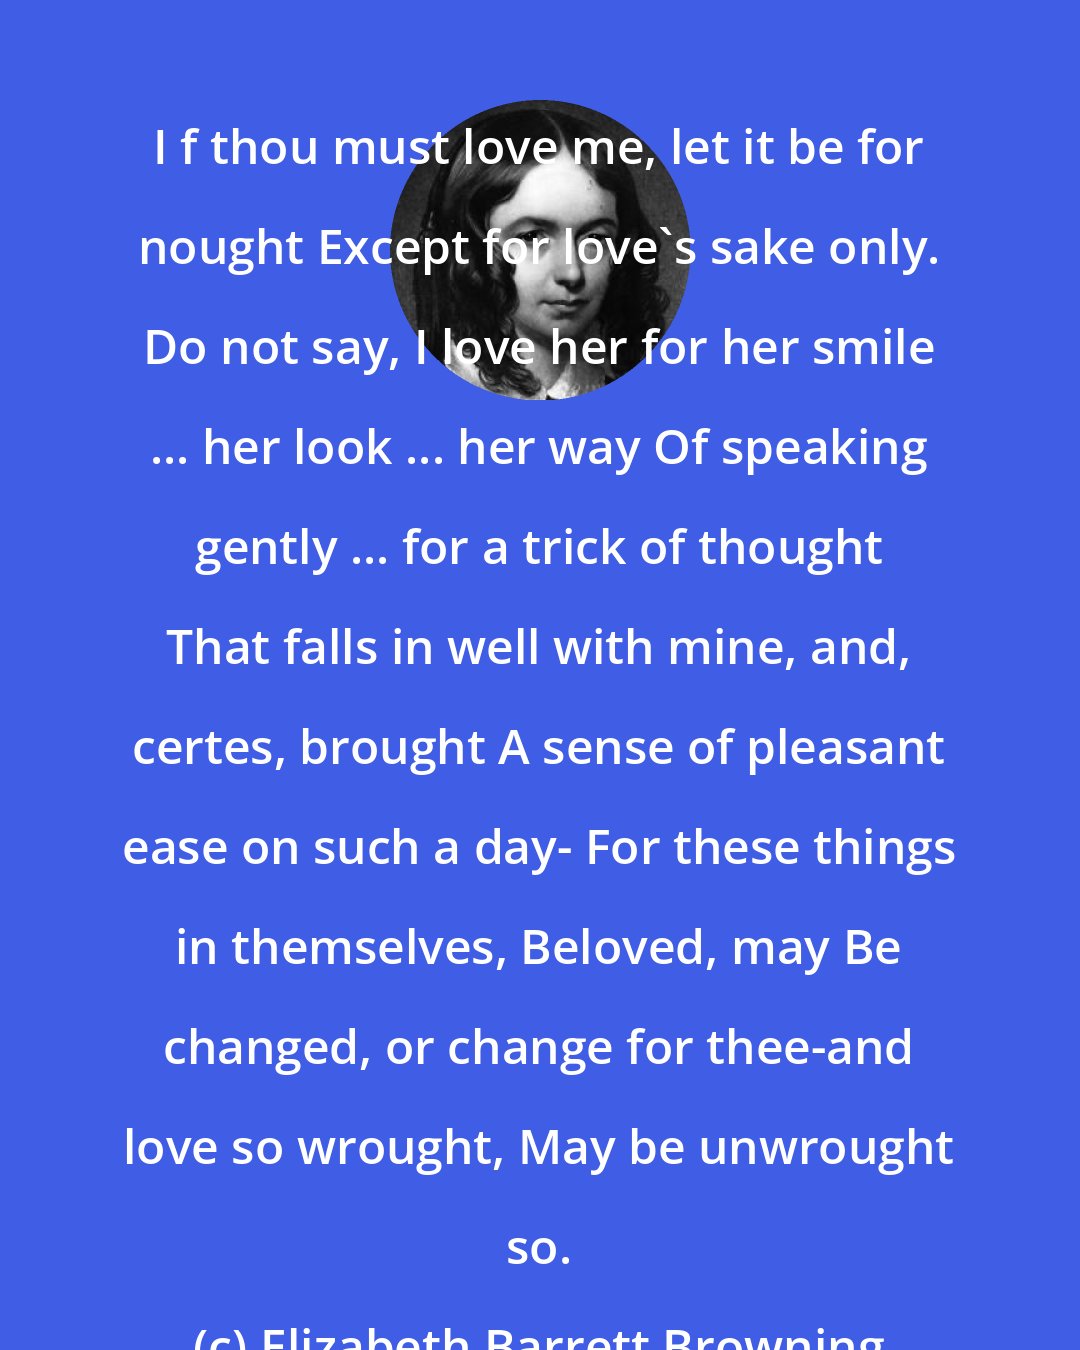 Elizabeth Barrett Browning: I f thou must love me, let it be for nought Except for love's sake only. Do not say, I love her for her smile ... her look ... her way Of speaking gently ... for a trick of thought That falls in well with mine, and, certes, brought A sense of pleasant ease on such a day- For these things in themselves, Beloved, may Be changed, or change for thee-and love so wrought, May be unwrought so.